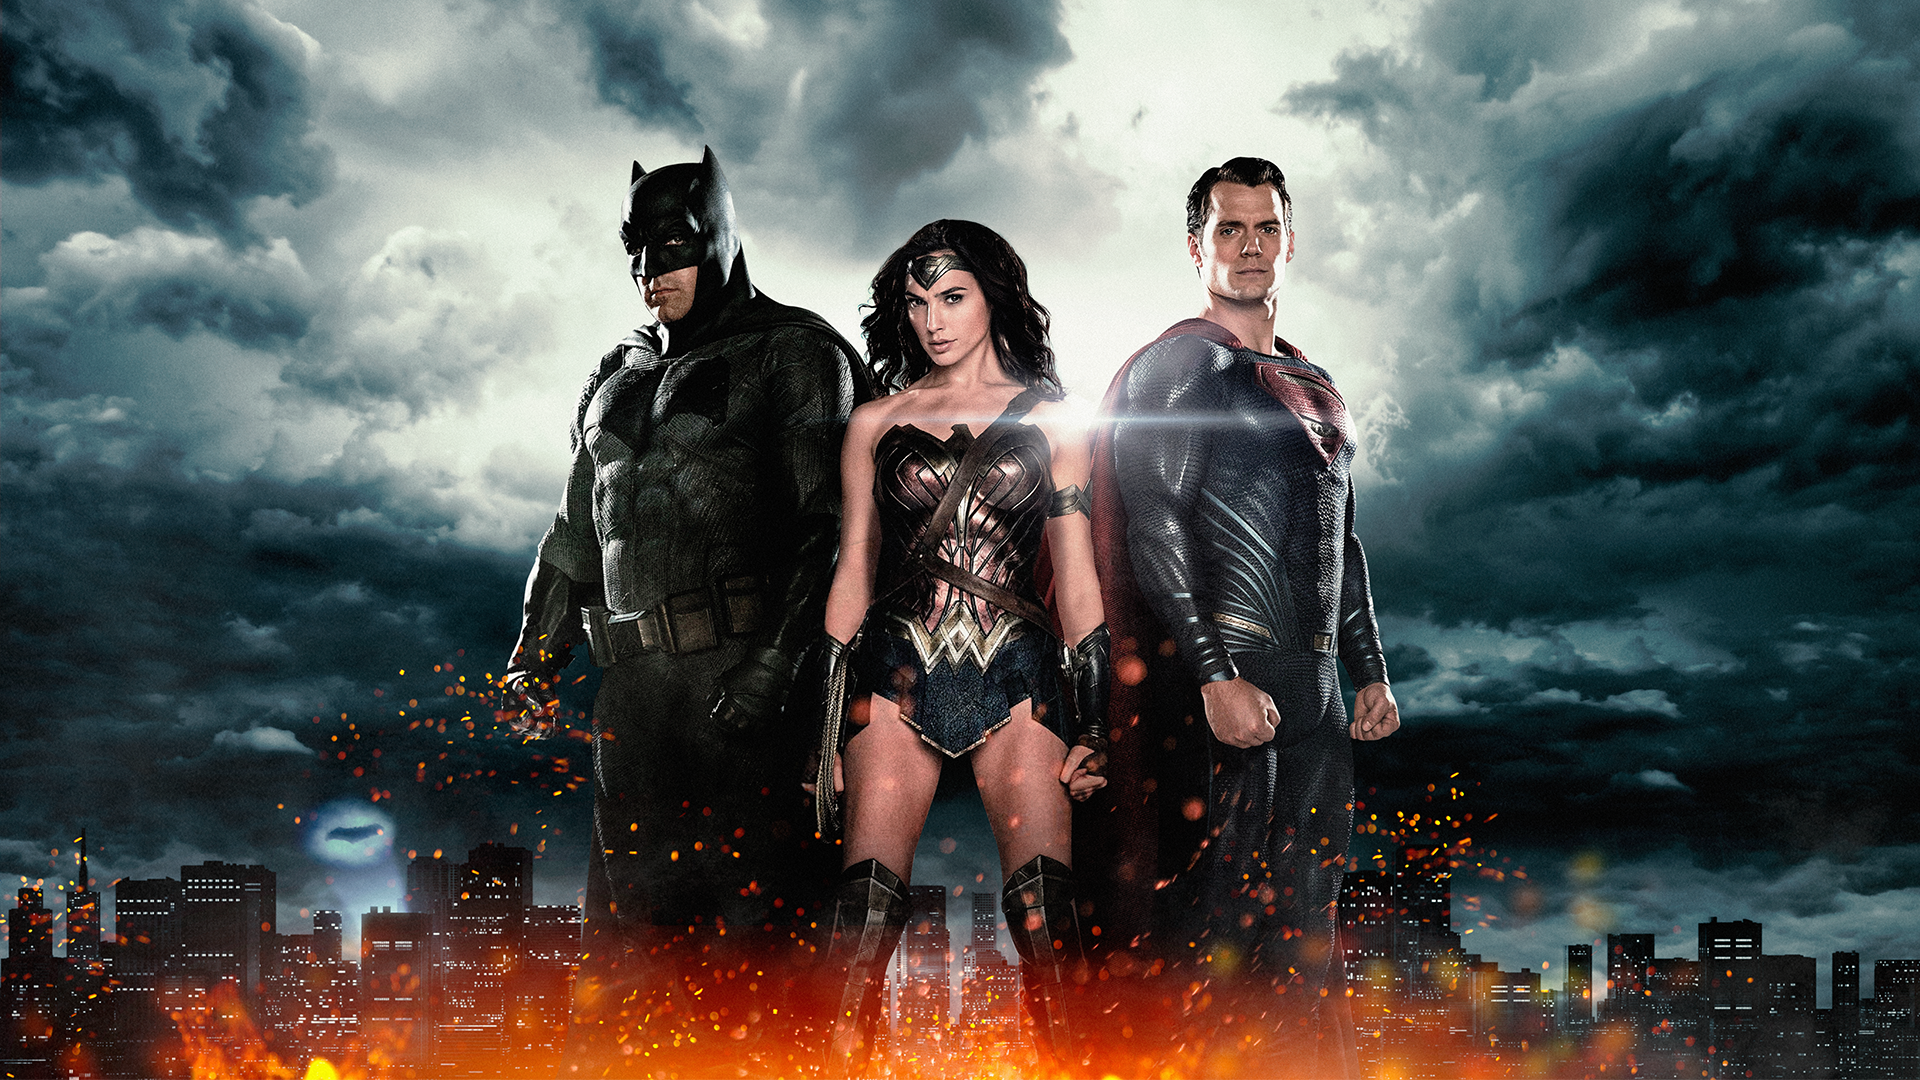 Batman v Superman: Dawn of Justice download the new for windows